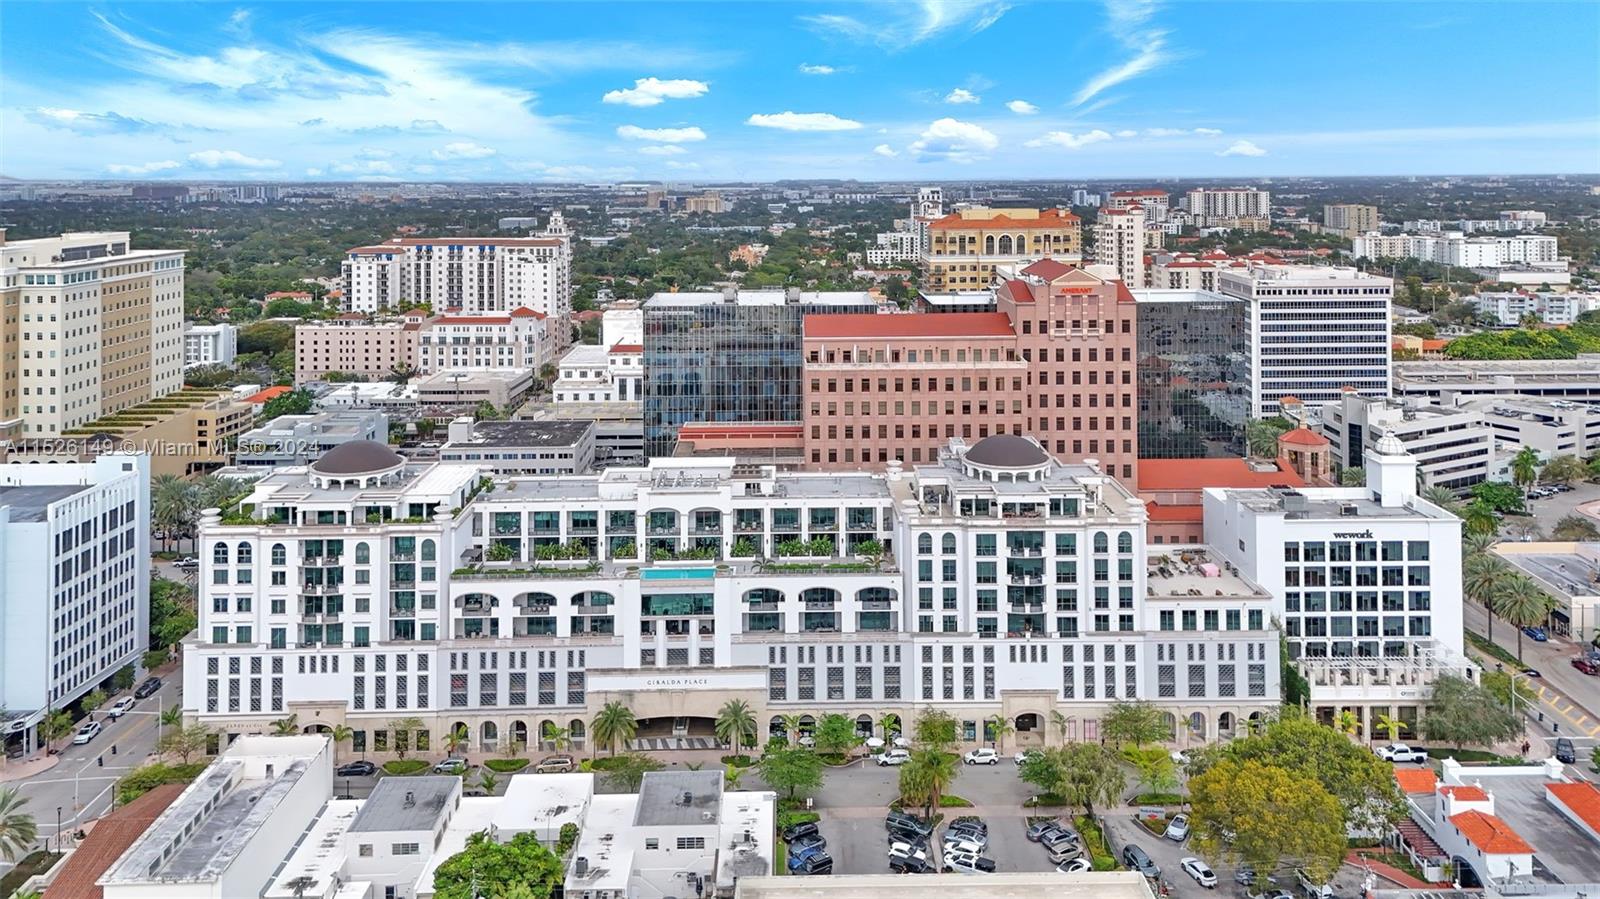 Discover luxurious living in the heart of Coral Gables with these two unique condos seamlessly combined into one phenomenal space (4,986 SF). This property is a true sanctuary, boasting 11-ft. ceilings, four balconies, a private elevator foyer, two kitchens, equipped with state-of-the-art Wolf &amp; Subzero appliances, dining, living &amp; family (or game) rooms &amp; a den. The Master Suite with double the square footage, is an exceptional retreat with a separate area creating an array of design possibilities. Whether a personal gym, office, or home yoga studio, the area can be customized to suit your lifestyle. We’ve left the flooring unfinished, allowing you the opportunity to personalize the space to your liking. Enjoy all the comforts of a house while experiencing the luxury of condominium living